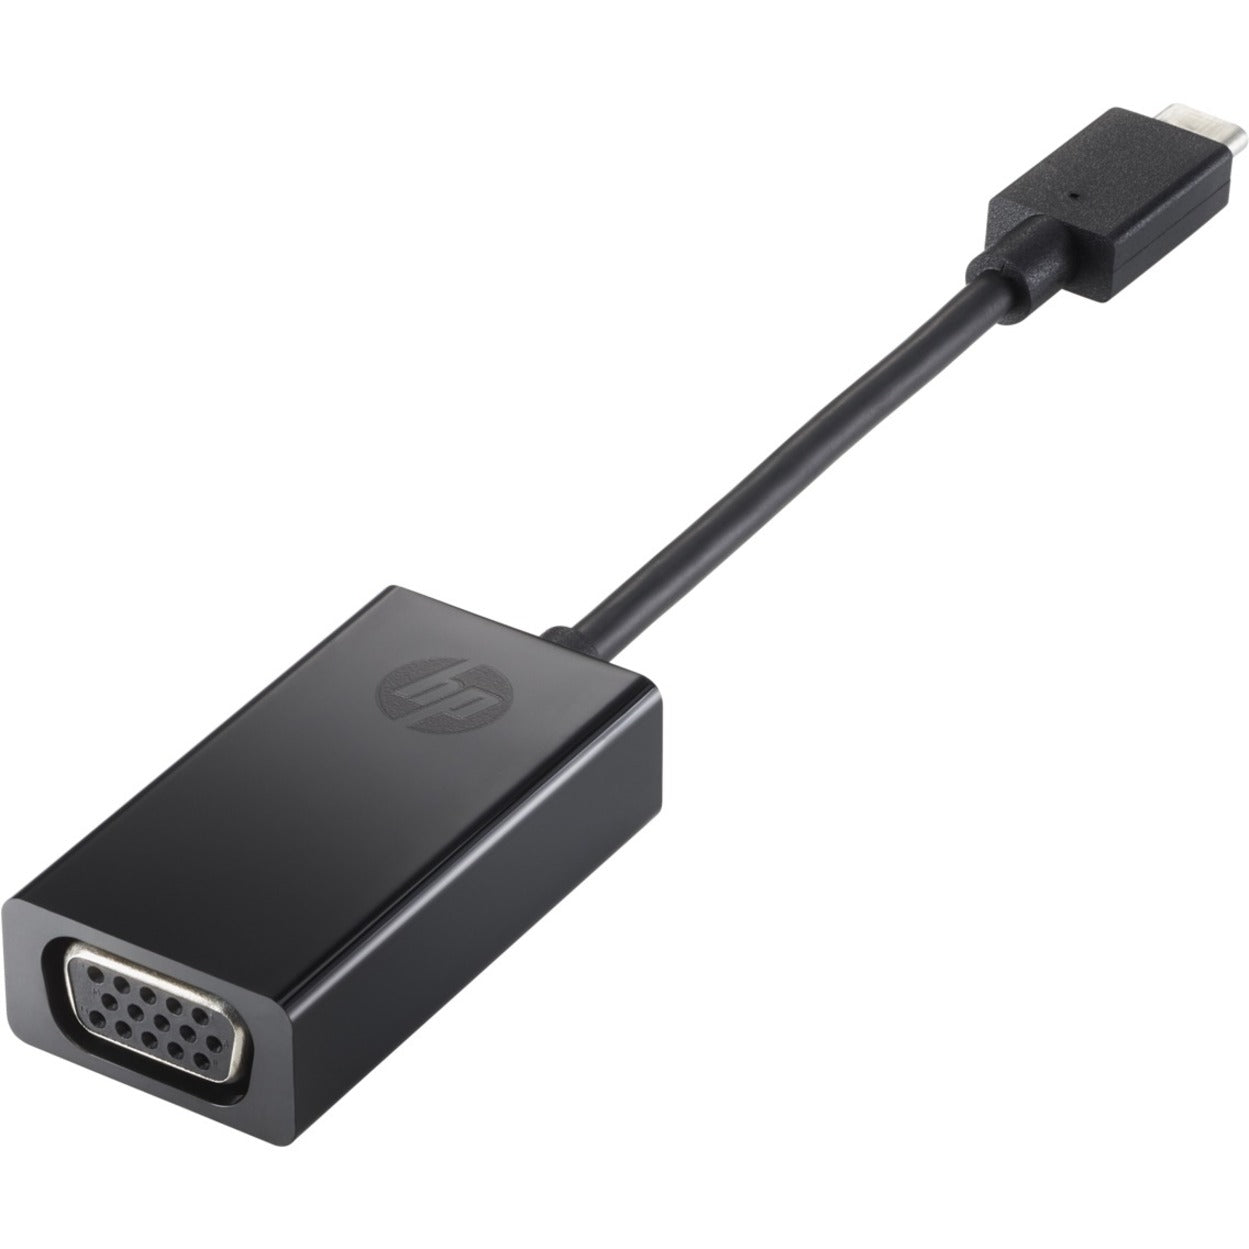 HP USB-C to VGA Adapter, Connect Your USB Type C Device to a VGA Display